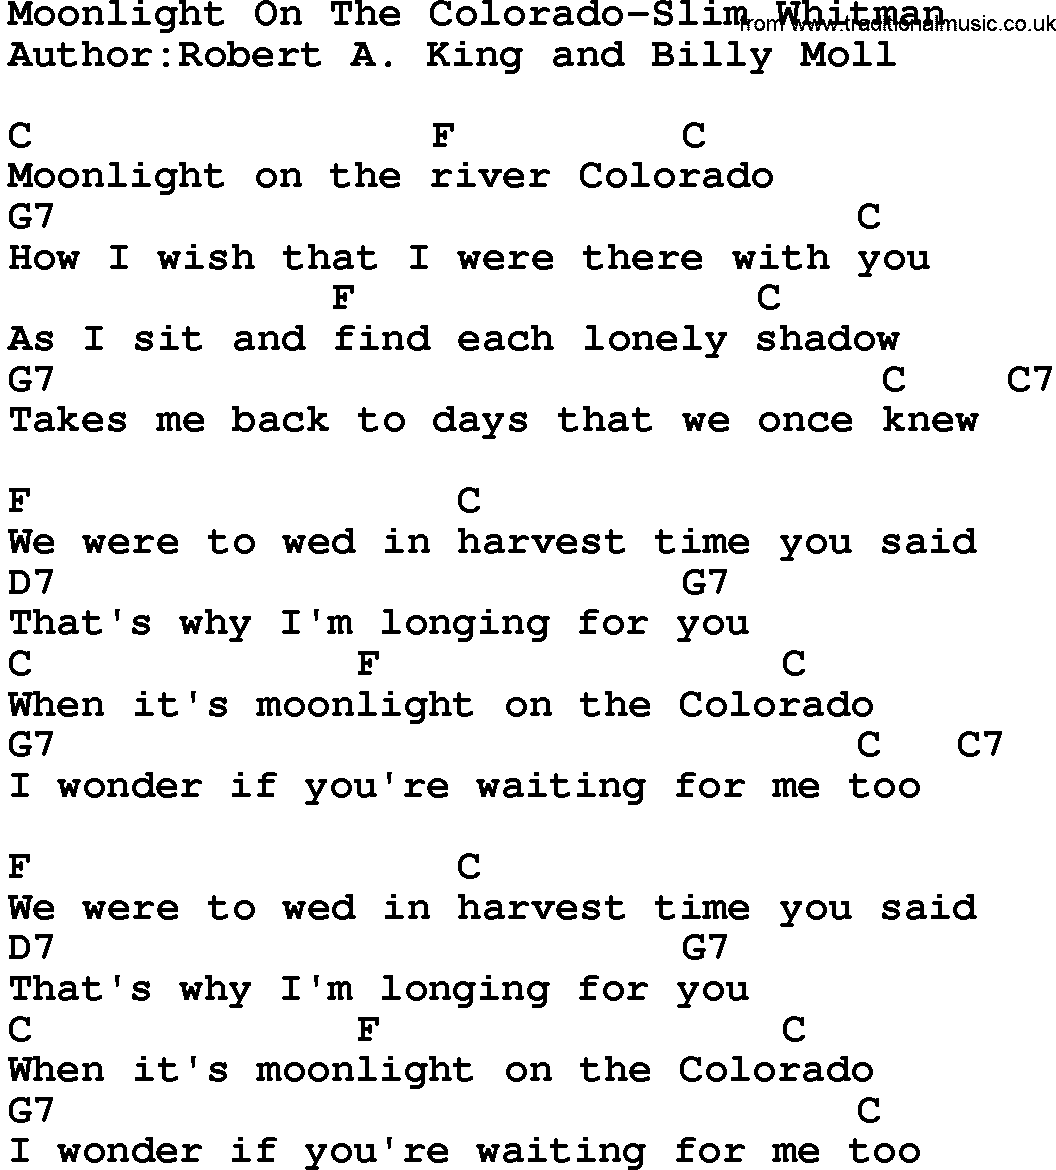 Country music song: Moonlight On The Colorado-Slim Whitman lyrics and chords